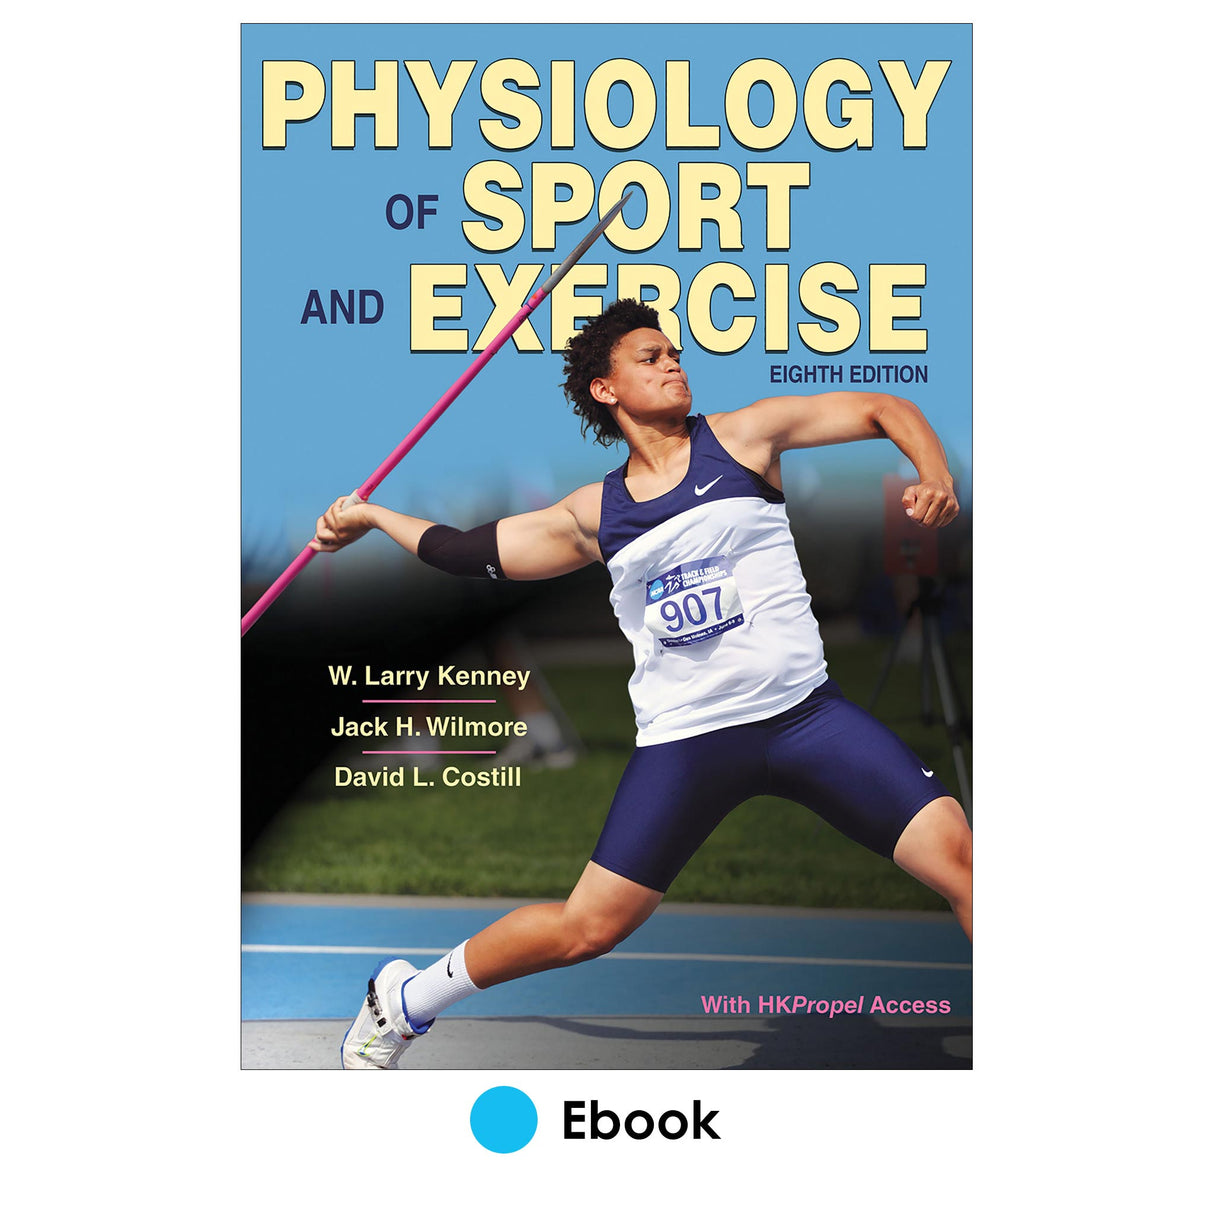 Physiology of Sport and Exercise 8th Edition Ebook With HKPropel Access